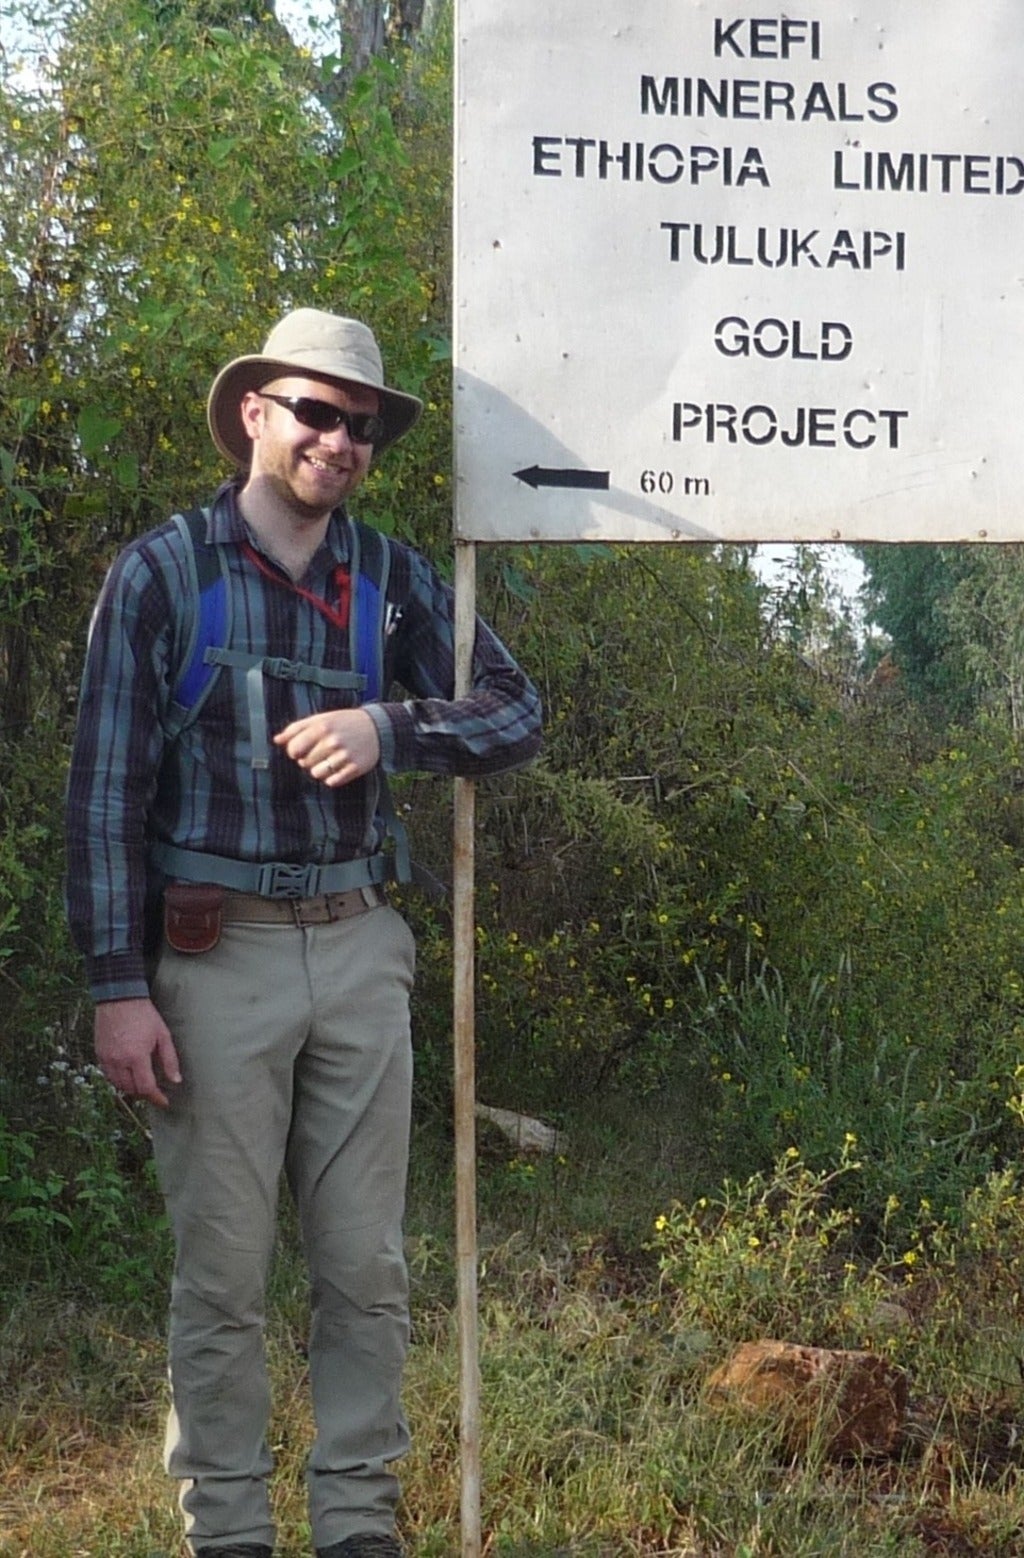 Chris is standing on a trail surrounded by greenery. He is wearing a hat, sunglasses, a plaid shirt, hiking pants and boots and is carrying a backpack. His arm is looped around a sign that says &quot;Kefi Minerals Ethiopia Limited Tulukapi Gold Project."